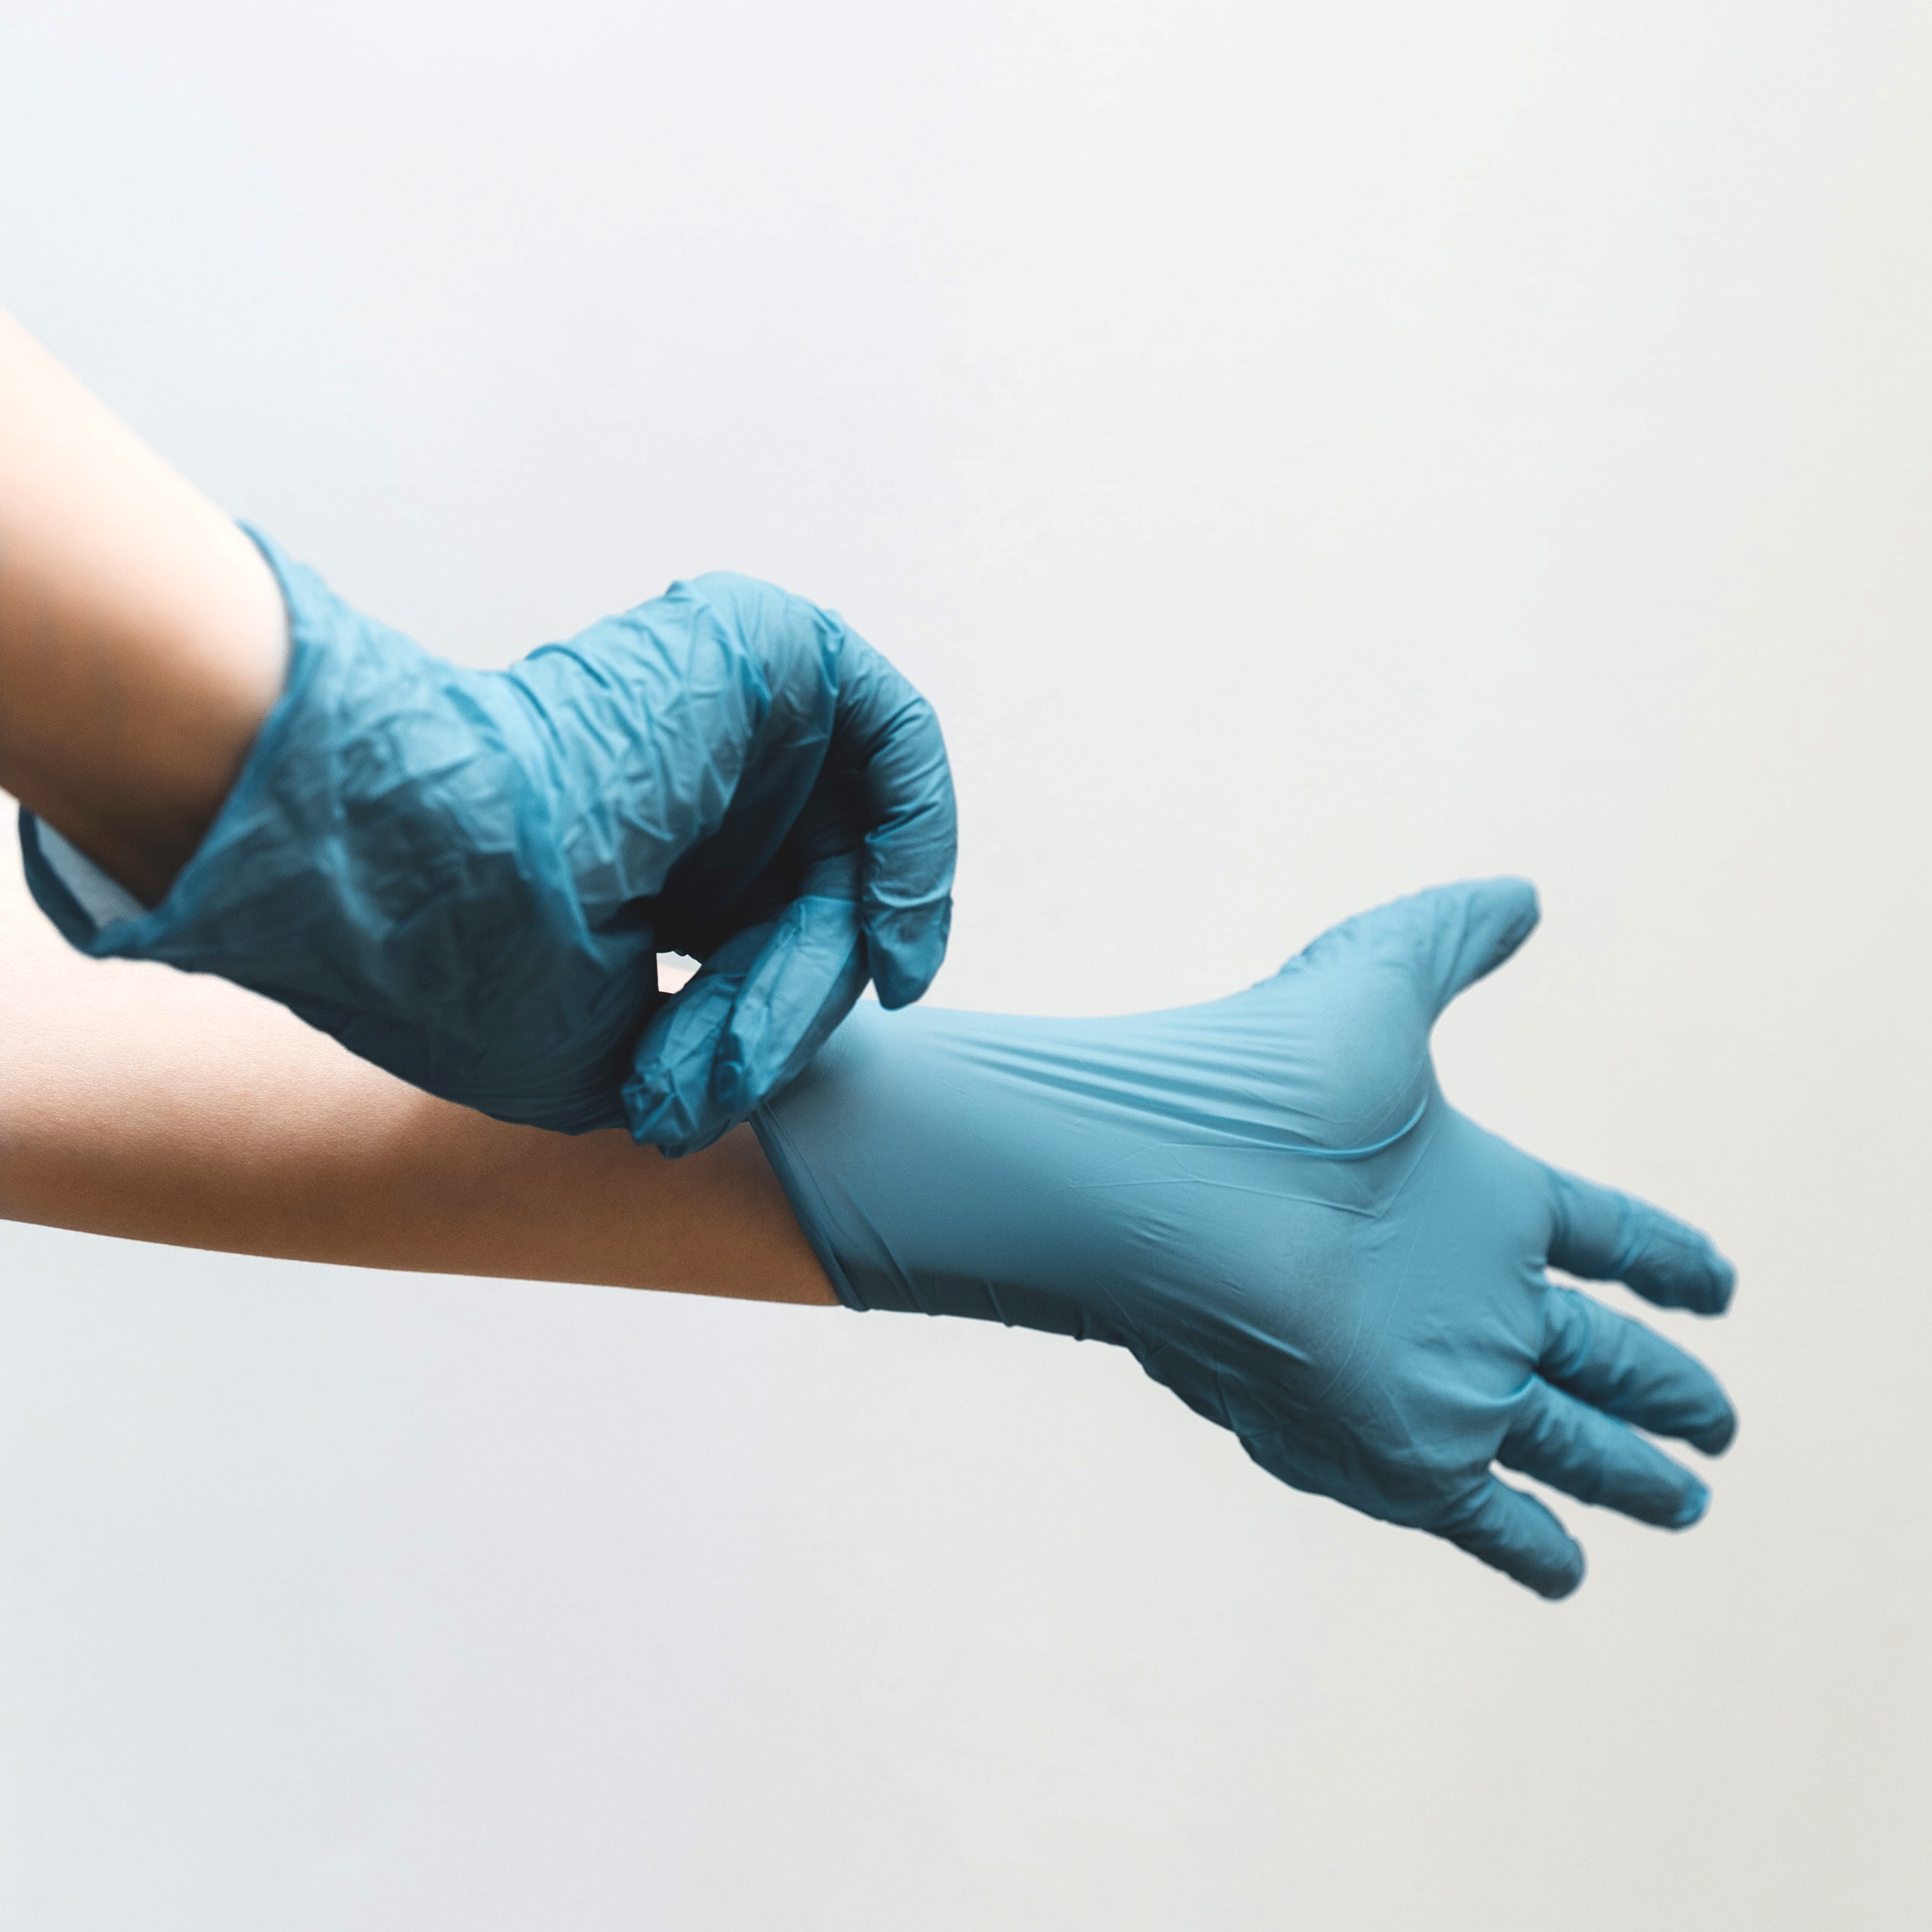 "Person putting on nitrile gloves"